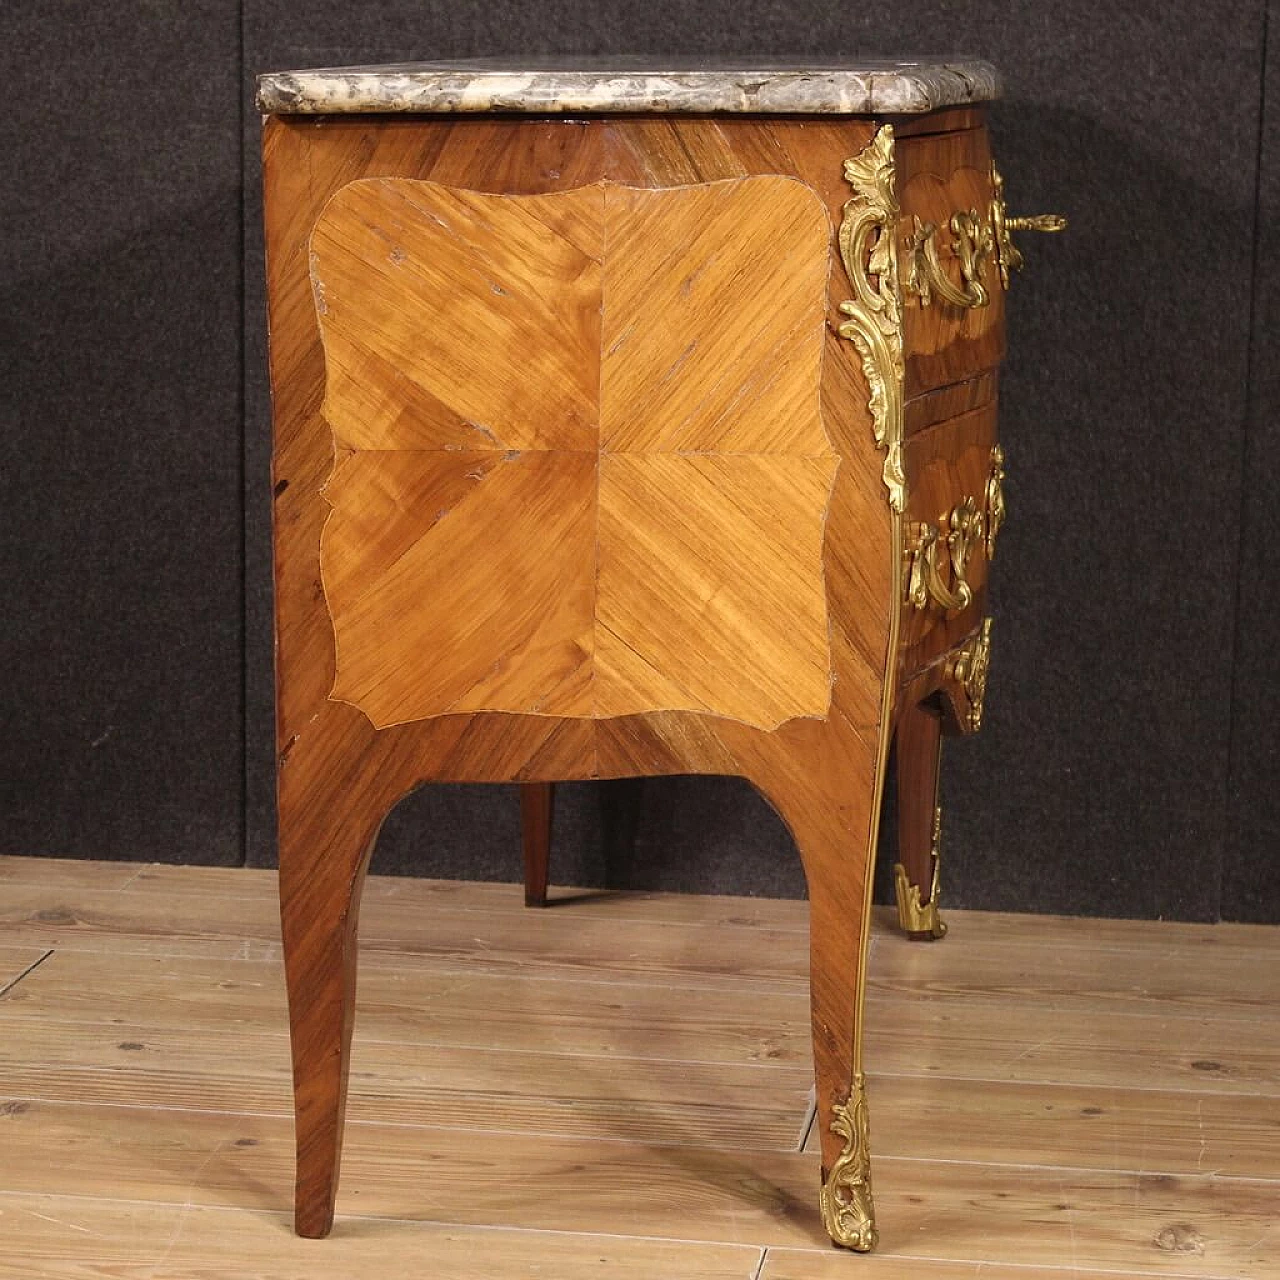 Two-drawer dresser in wood with marble top, mid-18th century 10